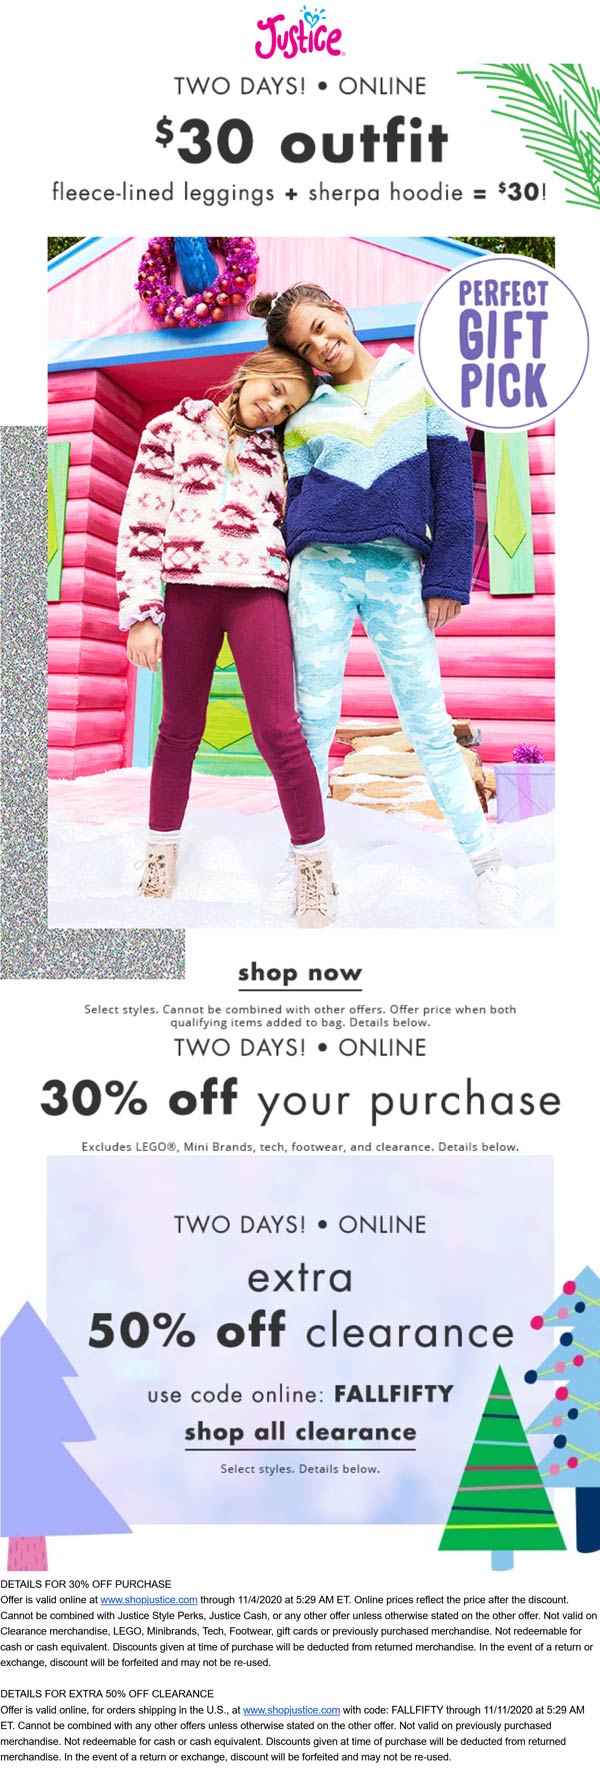 Justice stores Coupon  30% off online at Justice #justice 